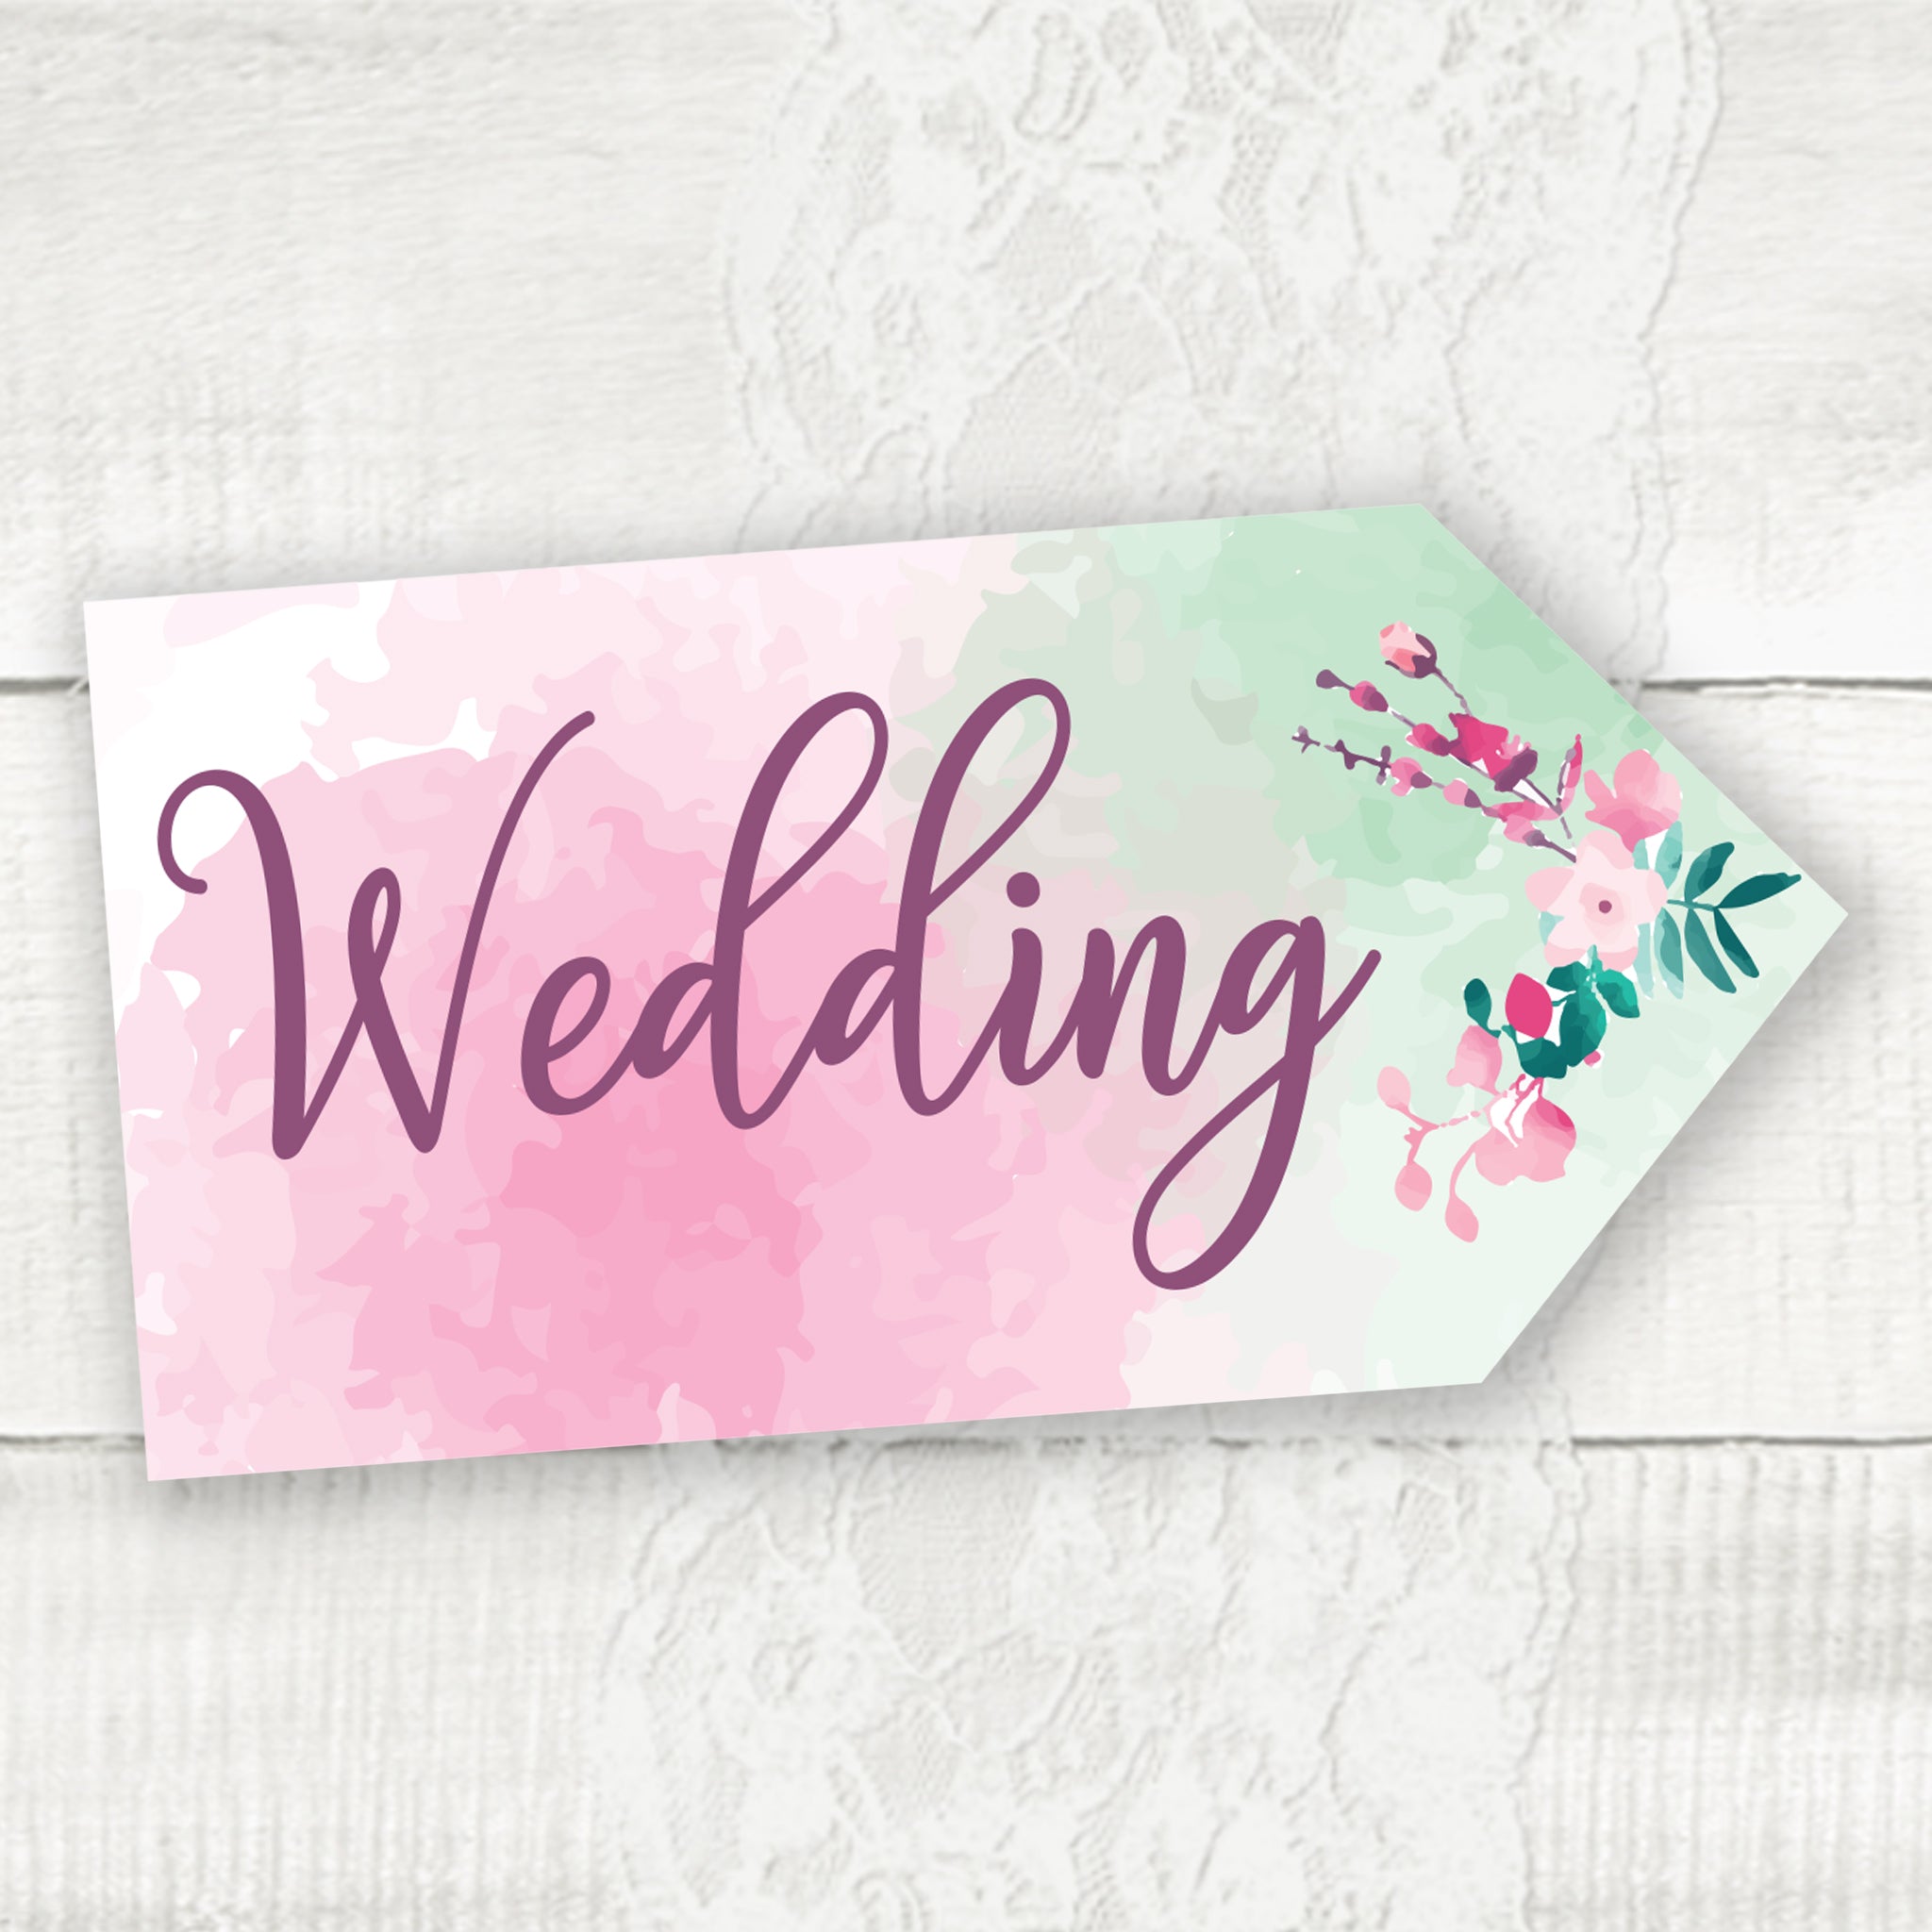 Wedding directional sign, road signs for weddings